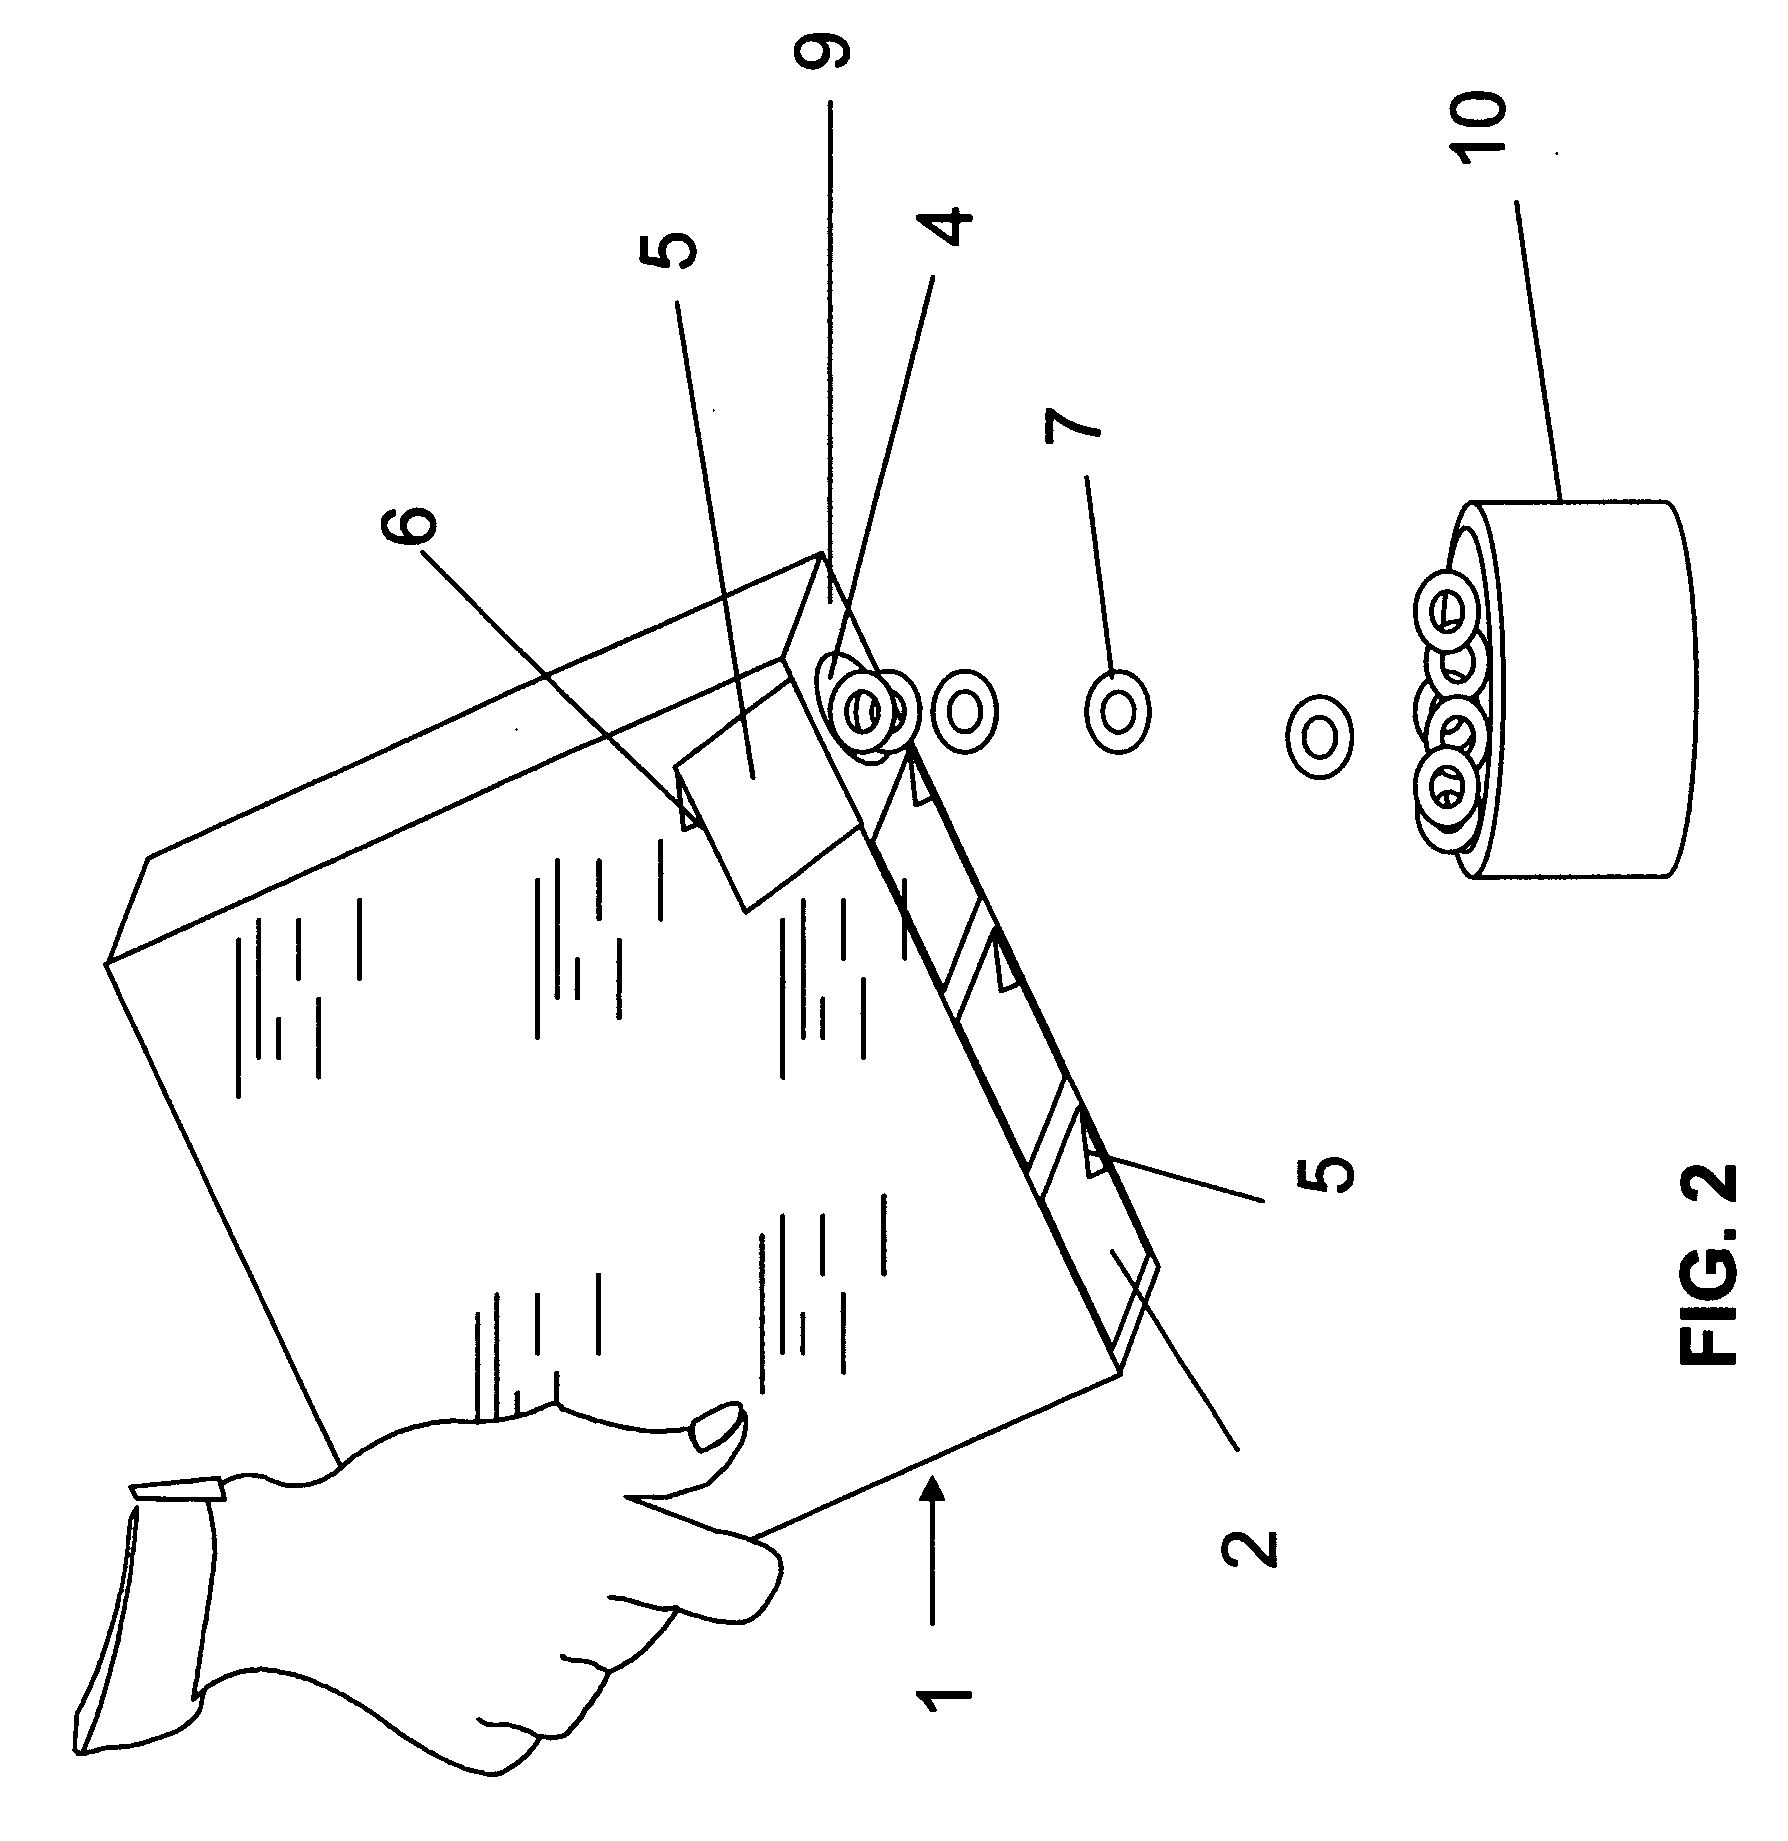 Article for storing and dispensing food